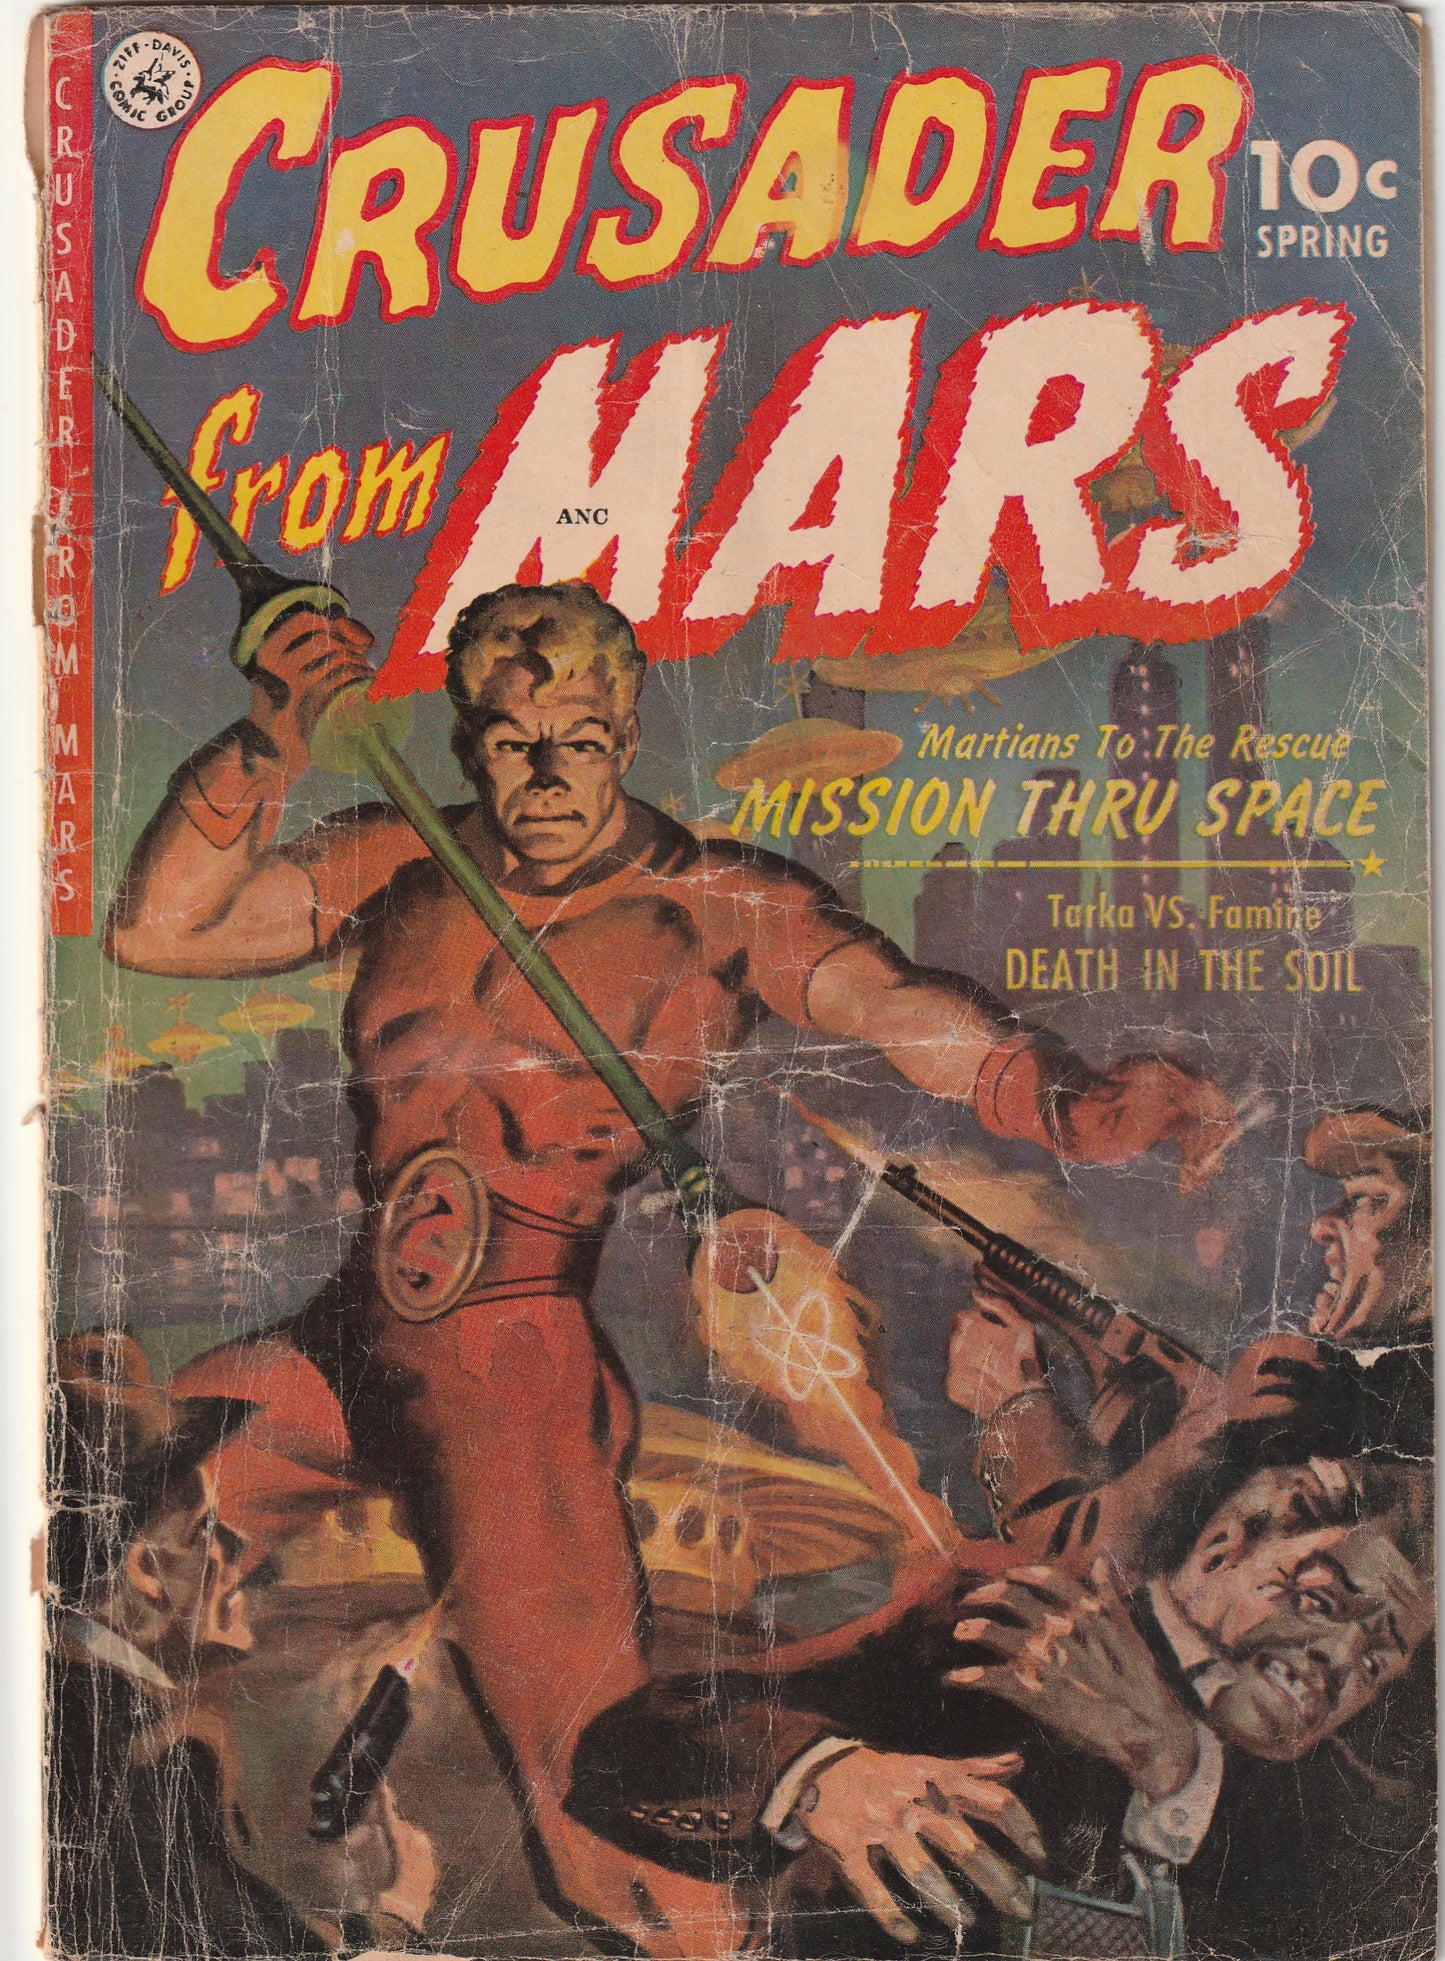 Crusader From Mars #1 (1952) - painted cover